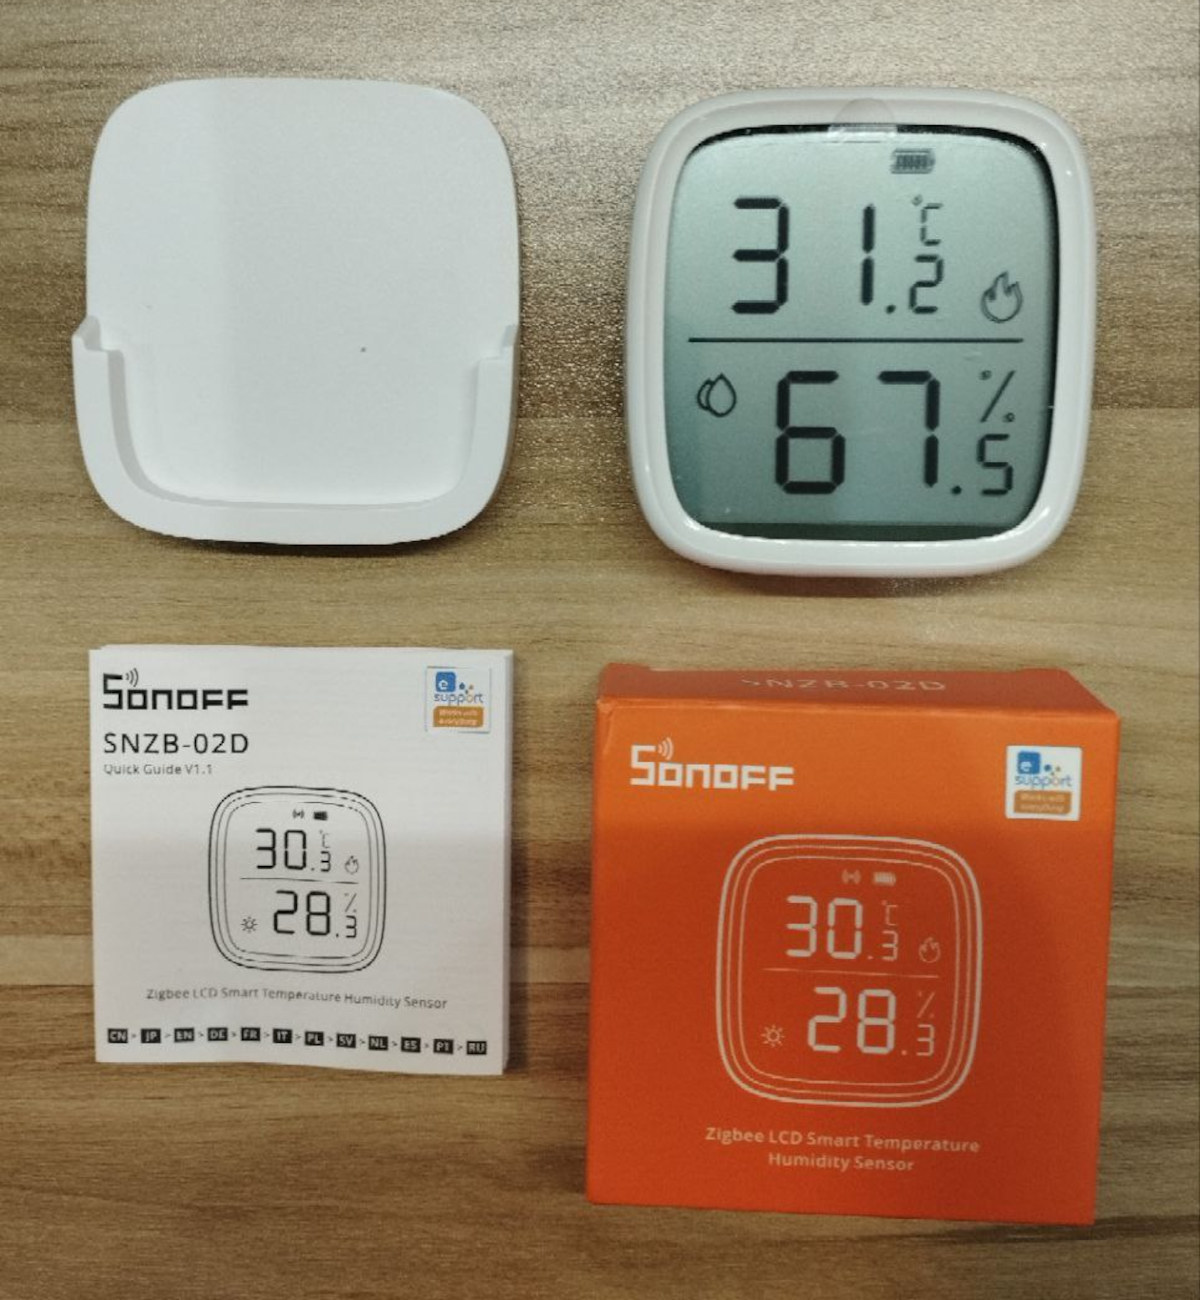 SONOFF SNZB-02D review - A Zigbee temperature & humidity sensor with a  2.5-inch display - CNX Software